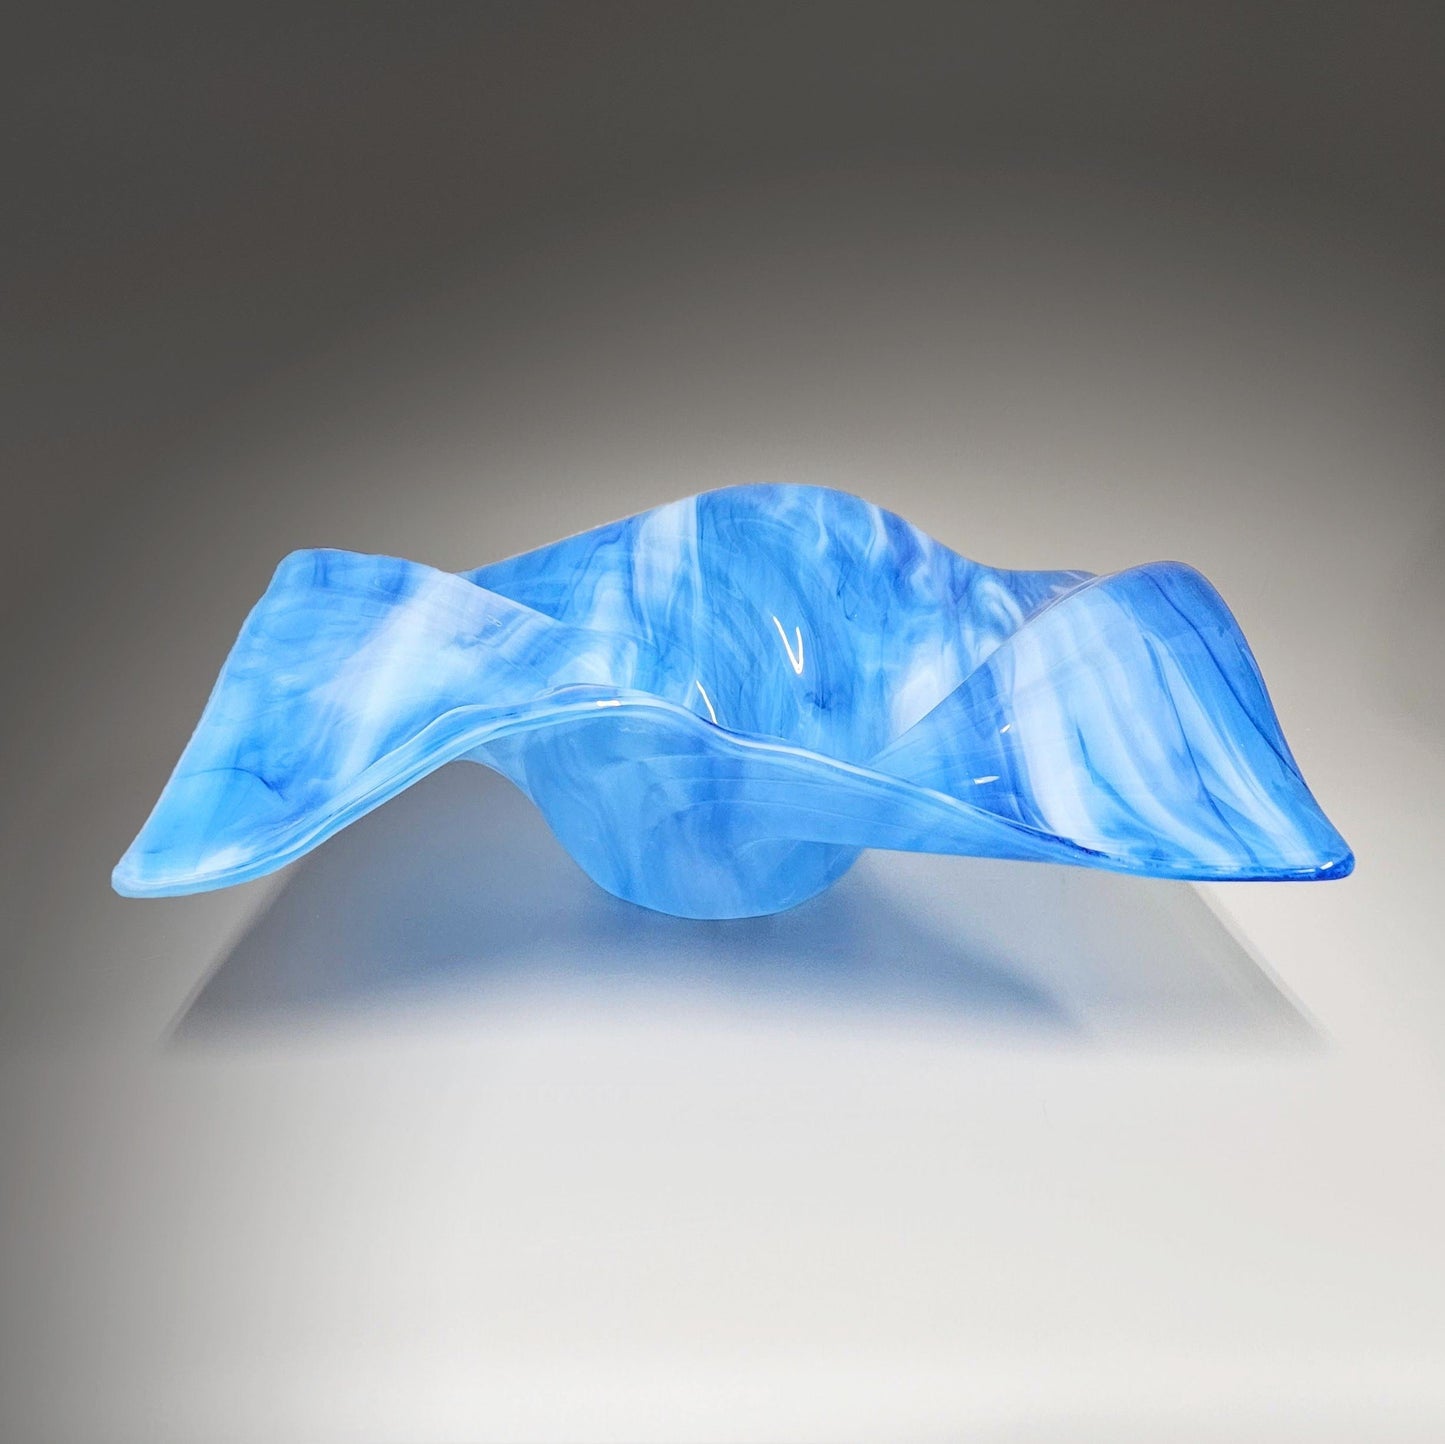 Glass Art Square Wave Bowl | Large Centerpiece in Blue and White